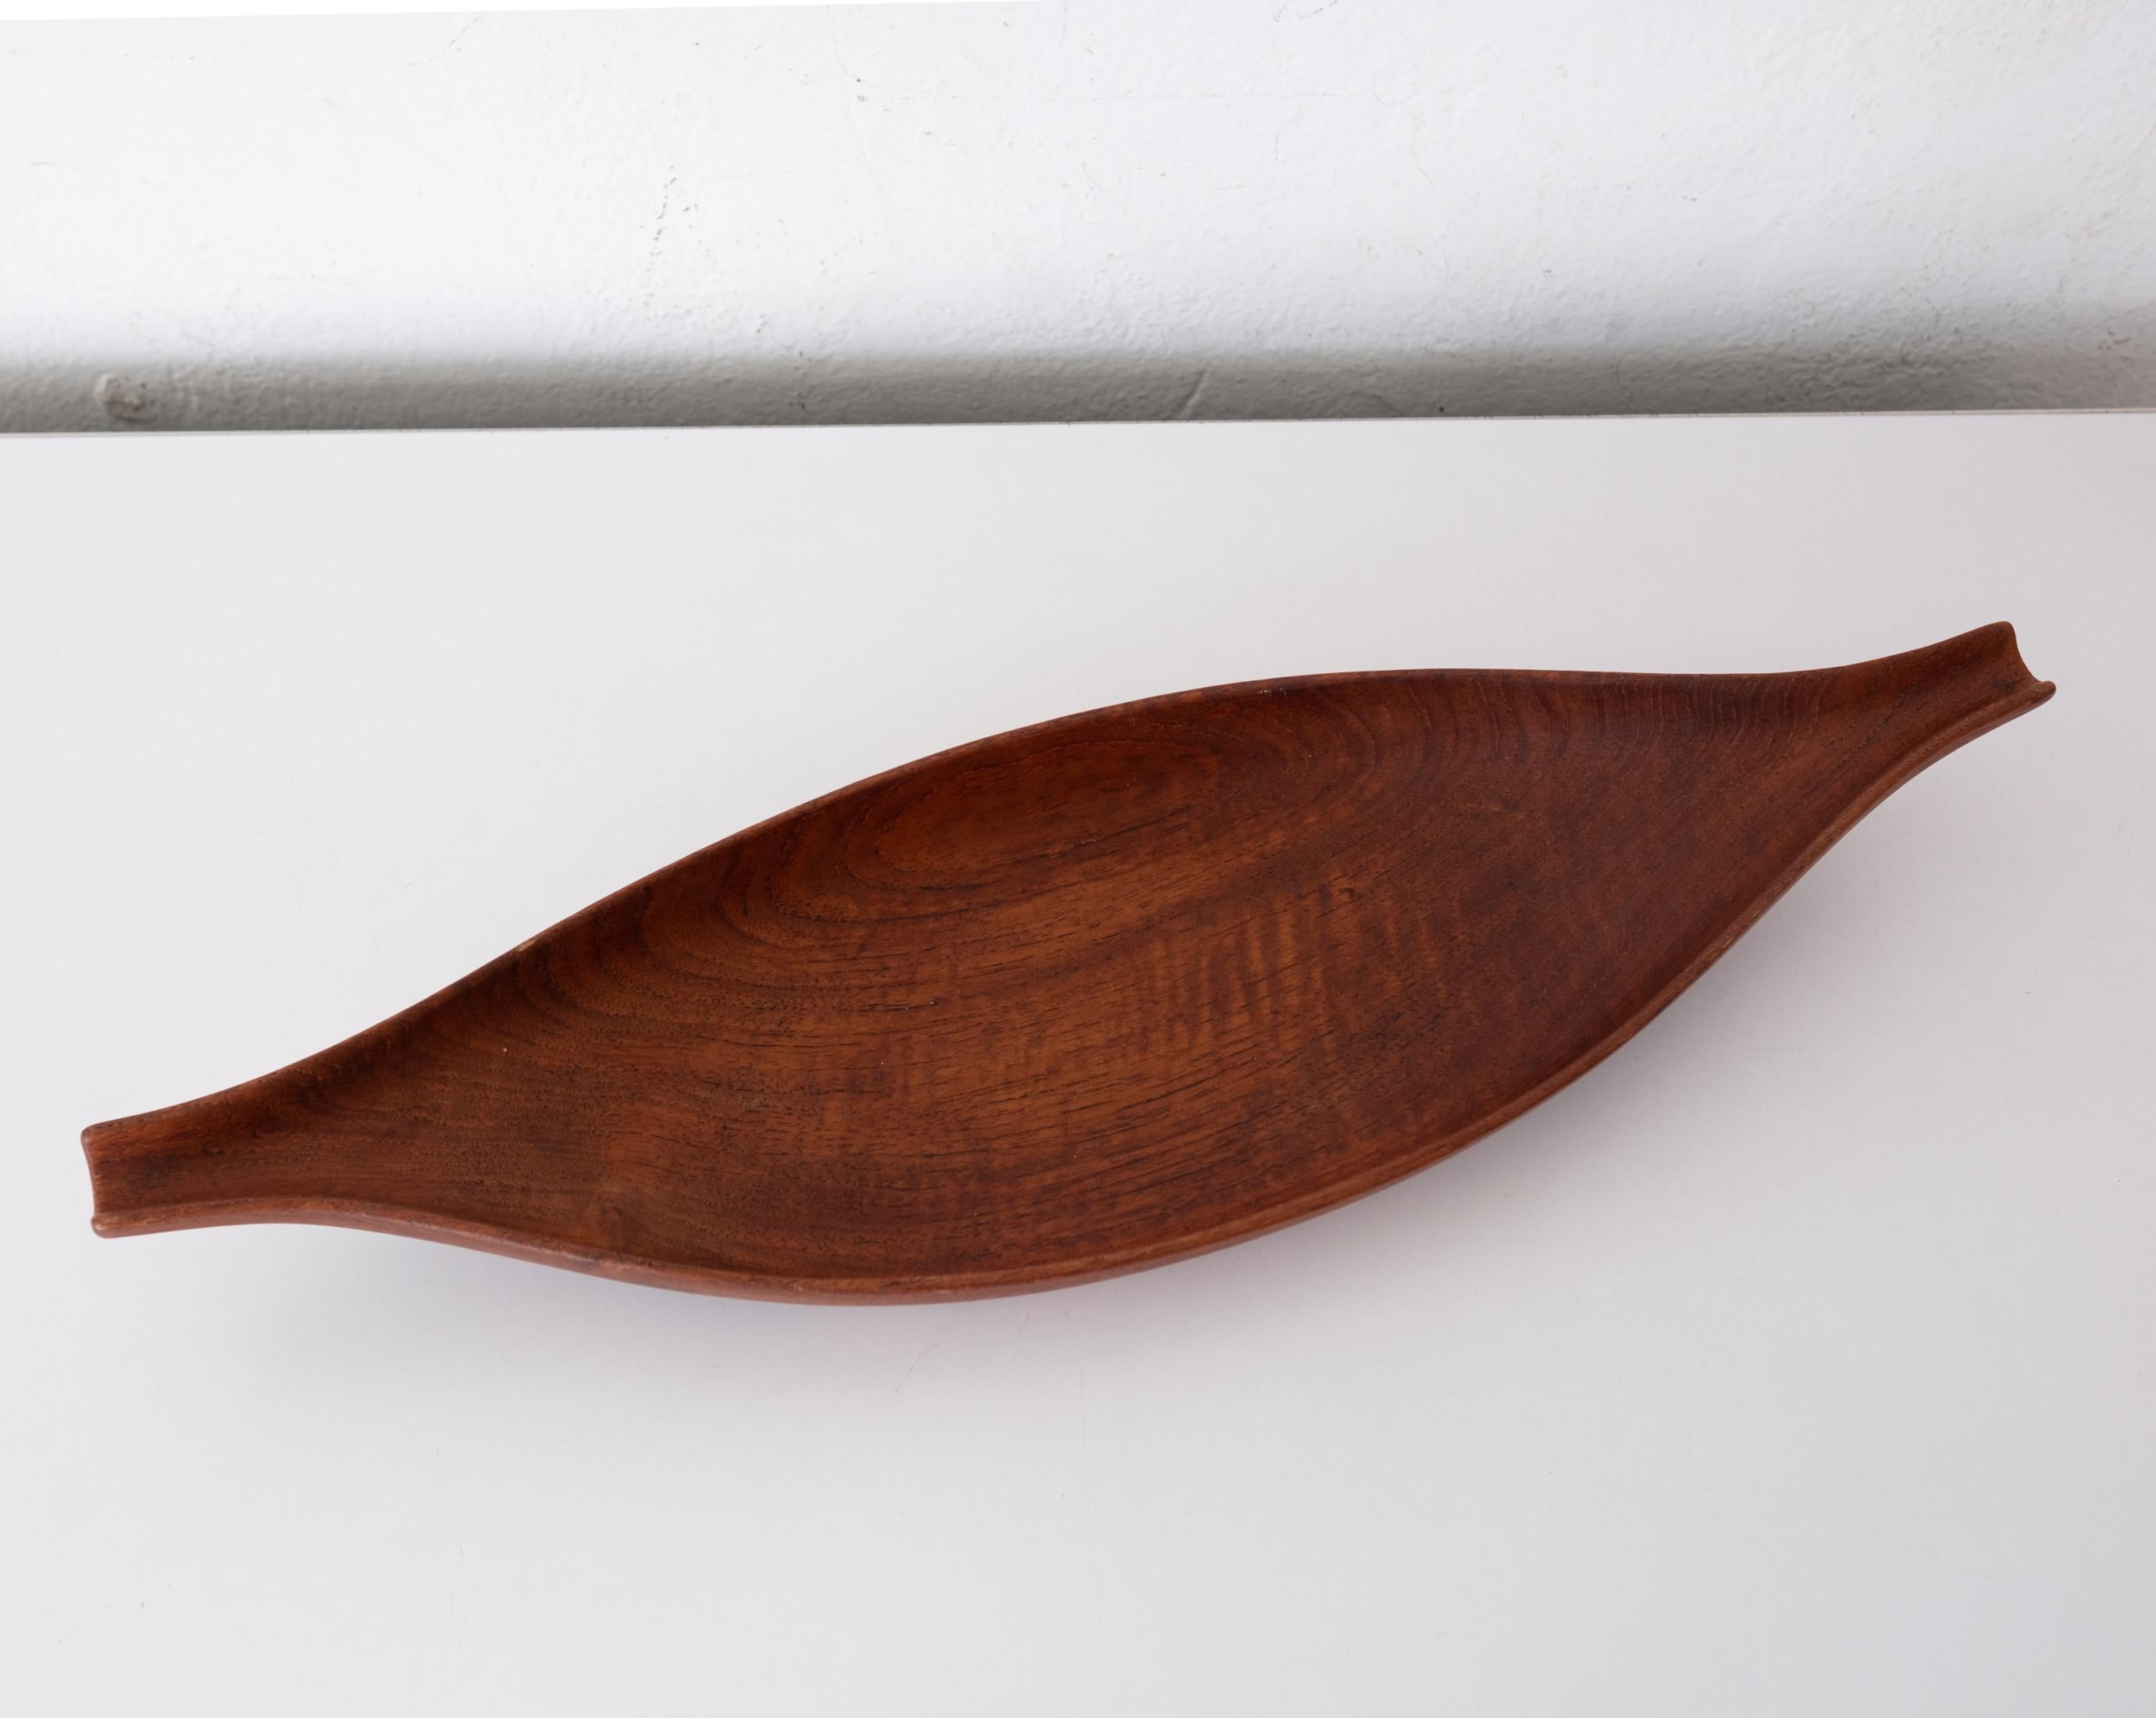 Sculptural Midcentury Italian Wood Fruit Bowl or Catch All by Anri, 1950s For Sale 4